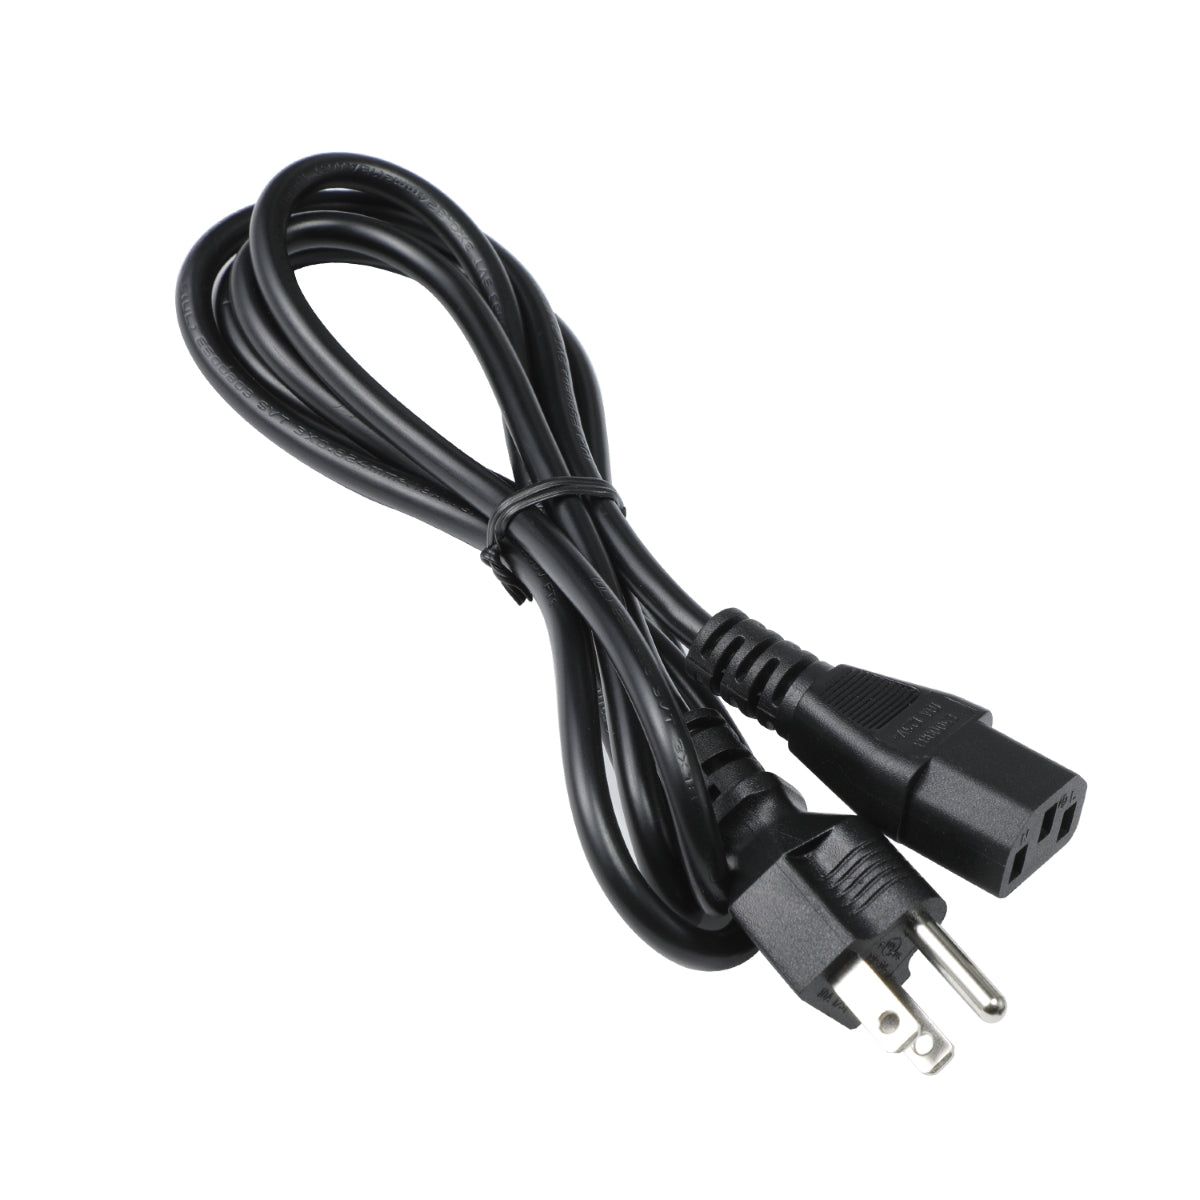 Power Cord for Acer AOPEN 27MX1 BMIIX Monitor